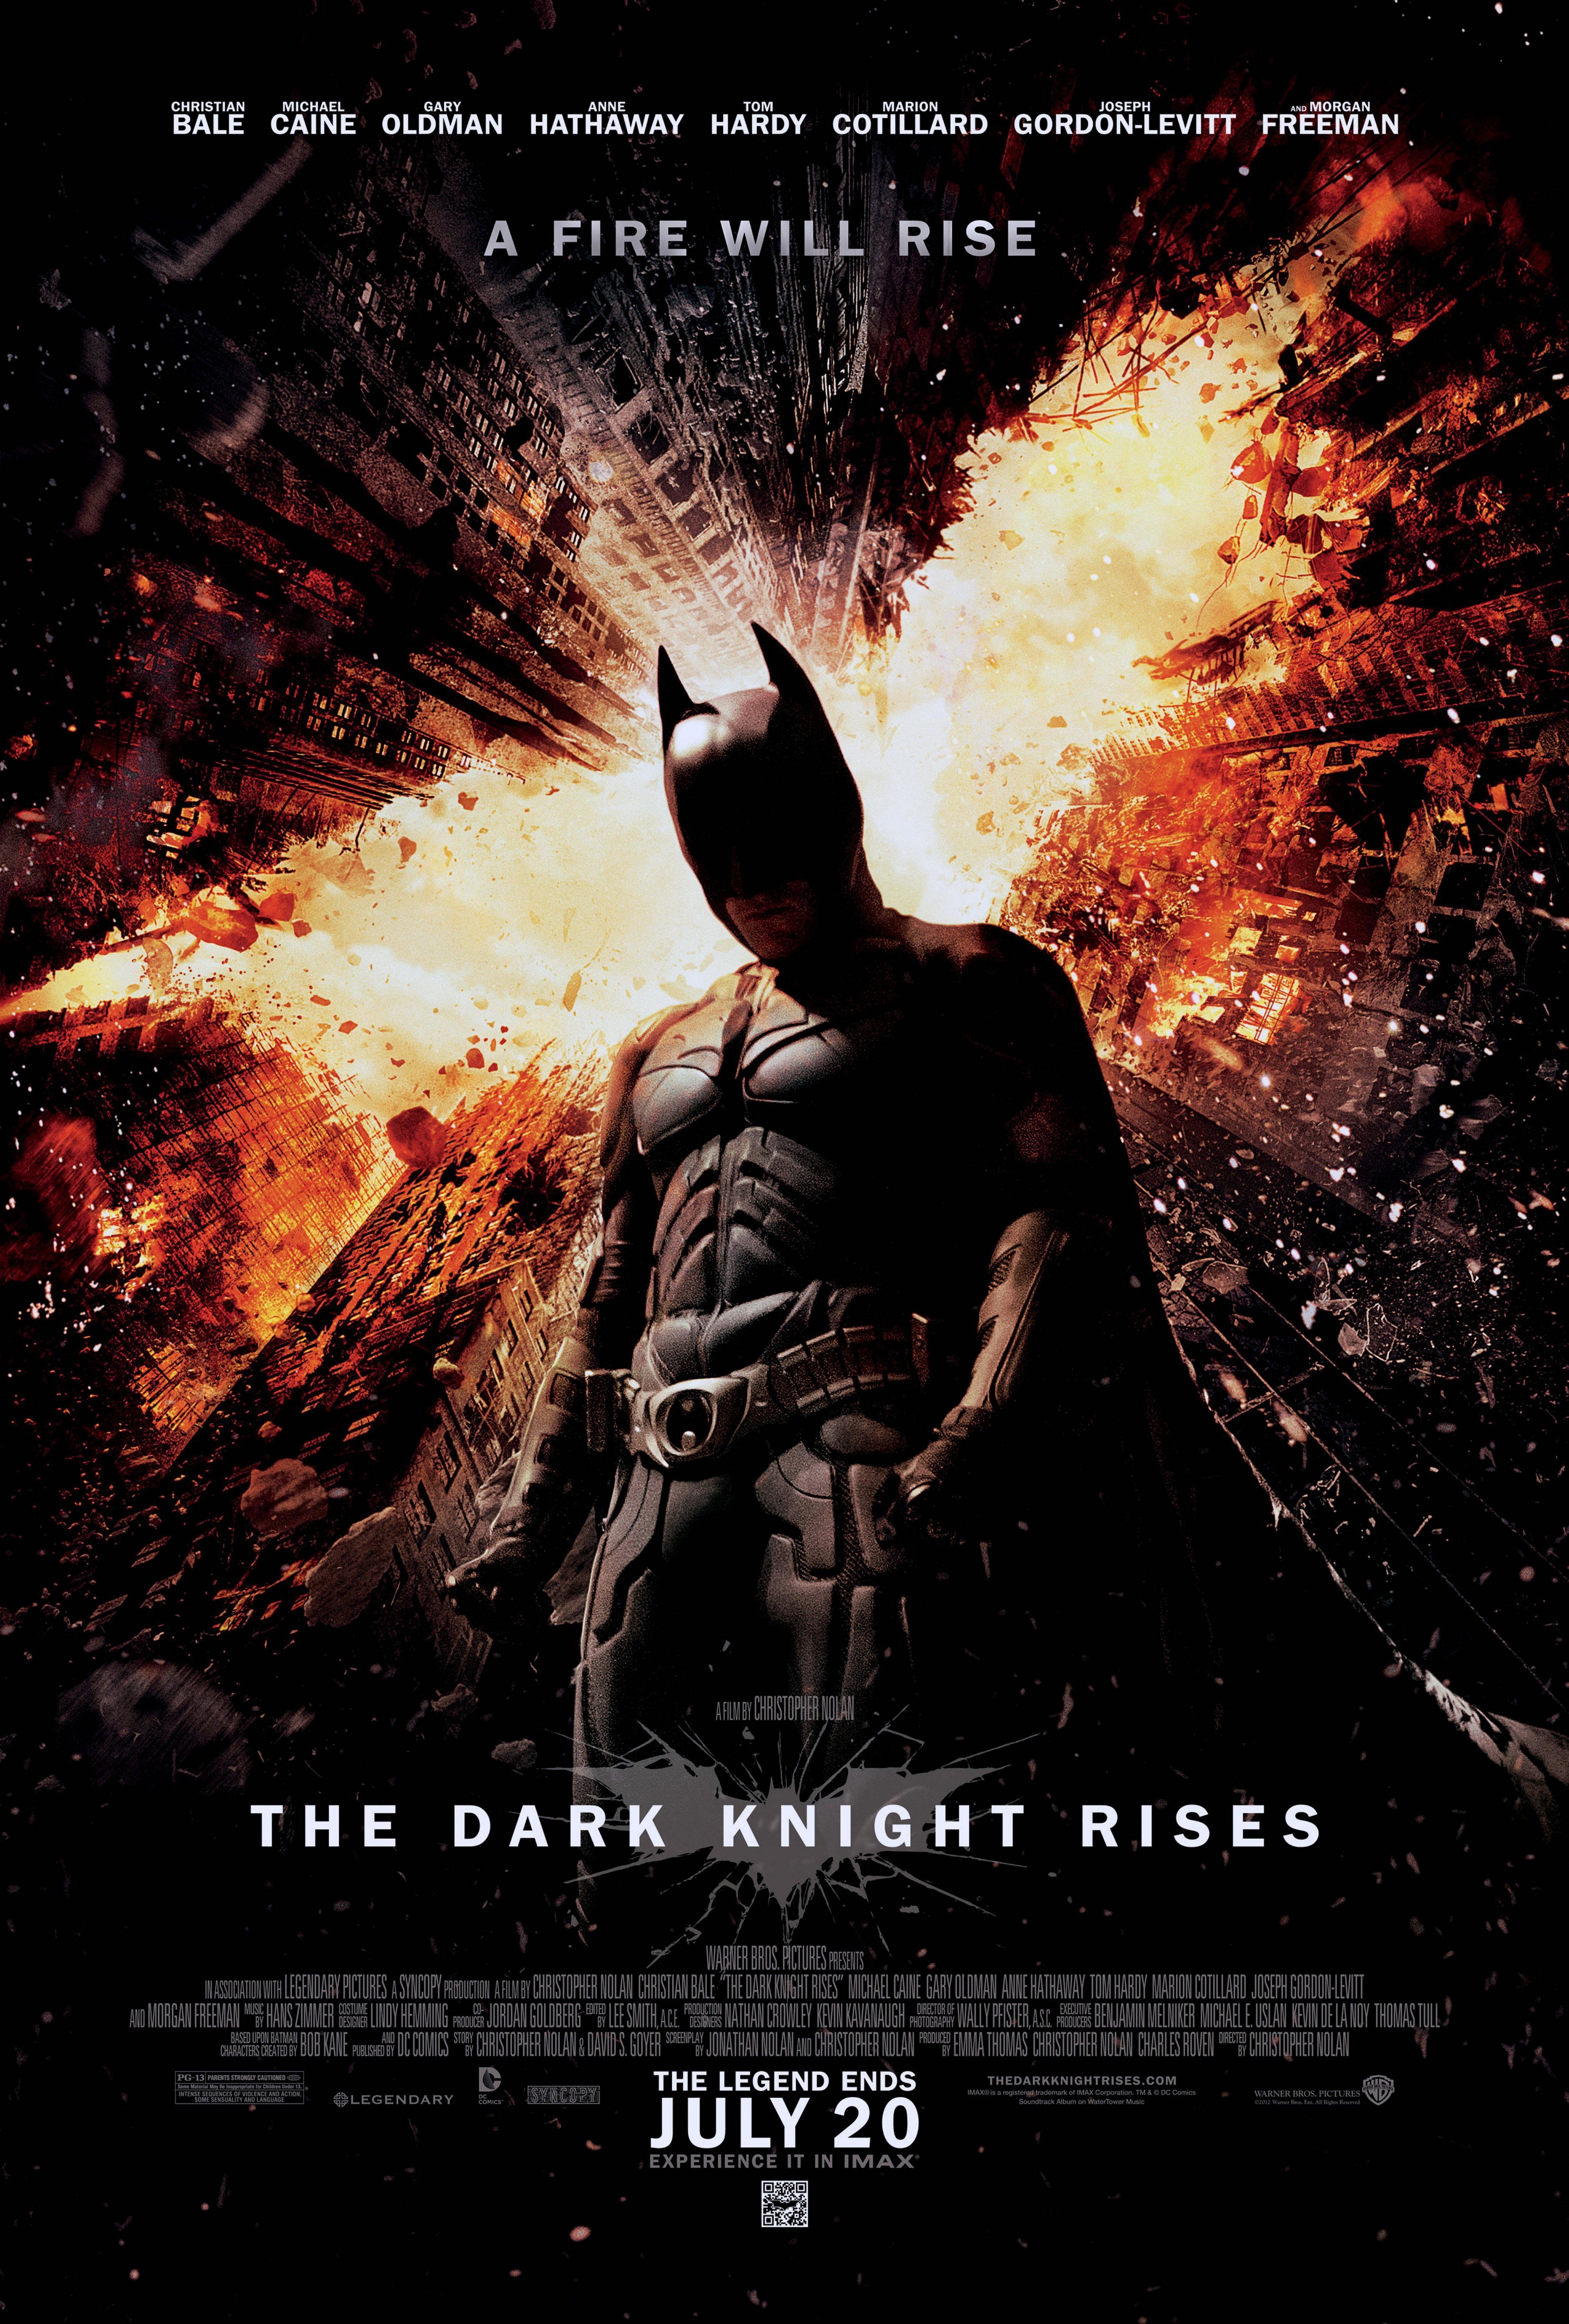 Batman stands in the center of a fiery cityscape on The Dark Knight Rises movie poster.